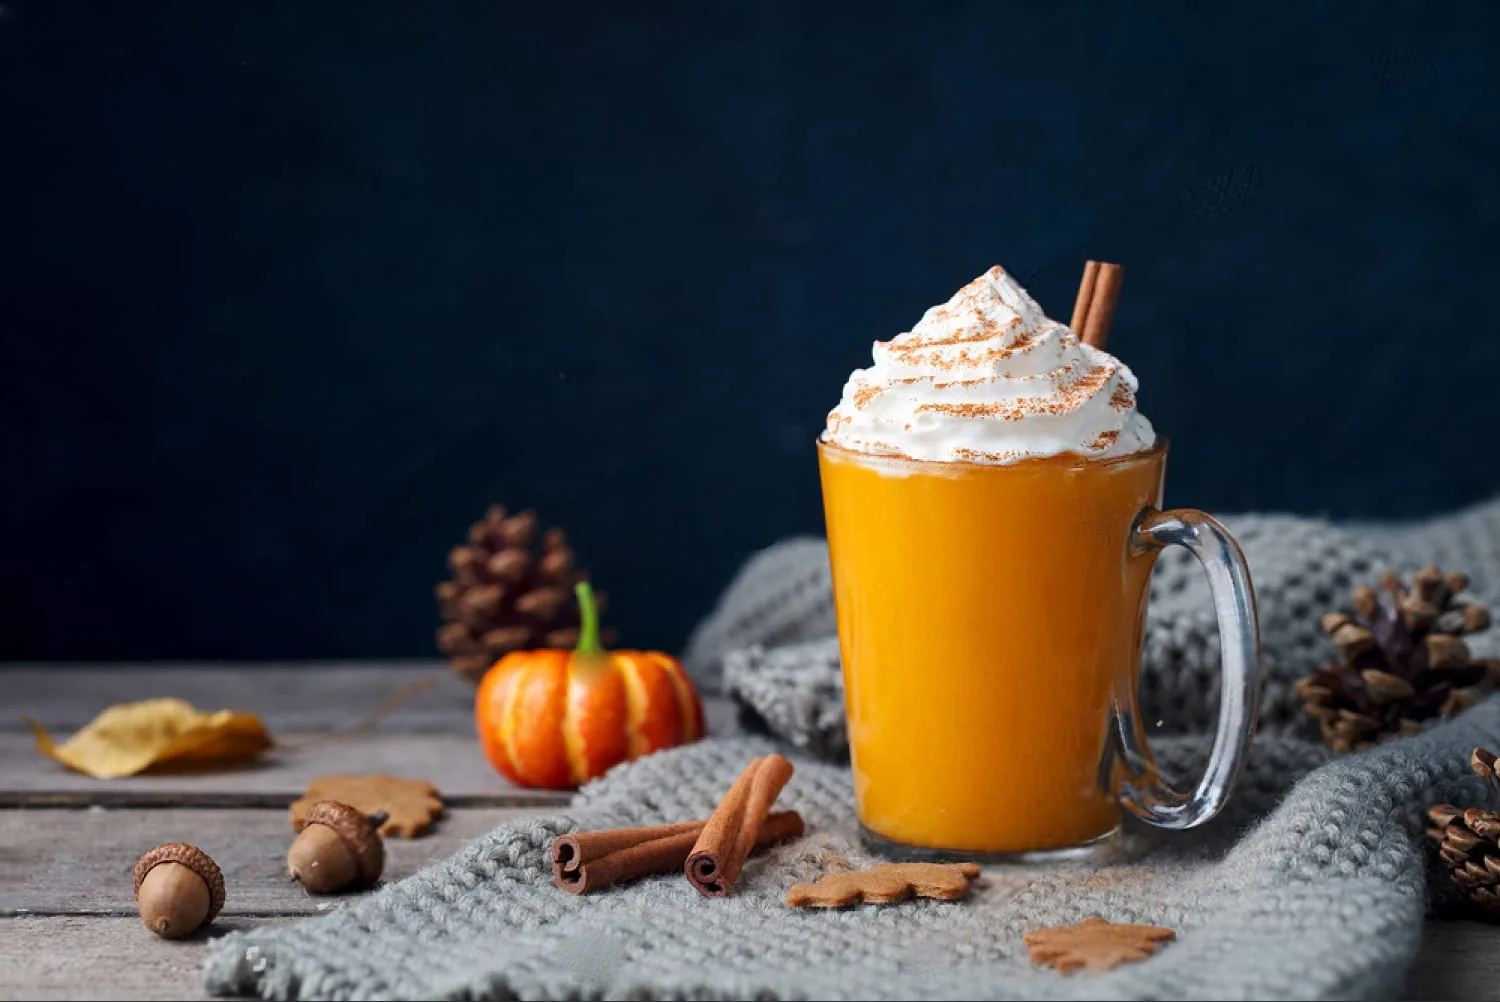 It May Be A Fall Favorite, But Here’s Why You Need To Stop Drinking Pumpkin Spiced Lattes